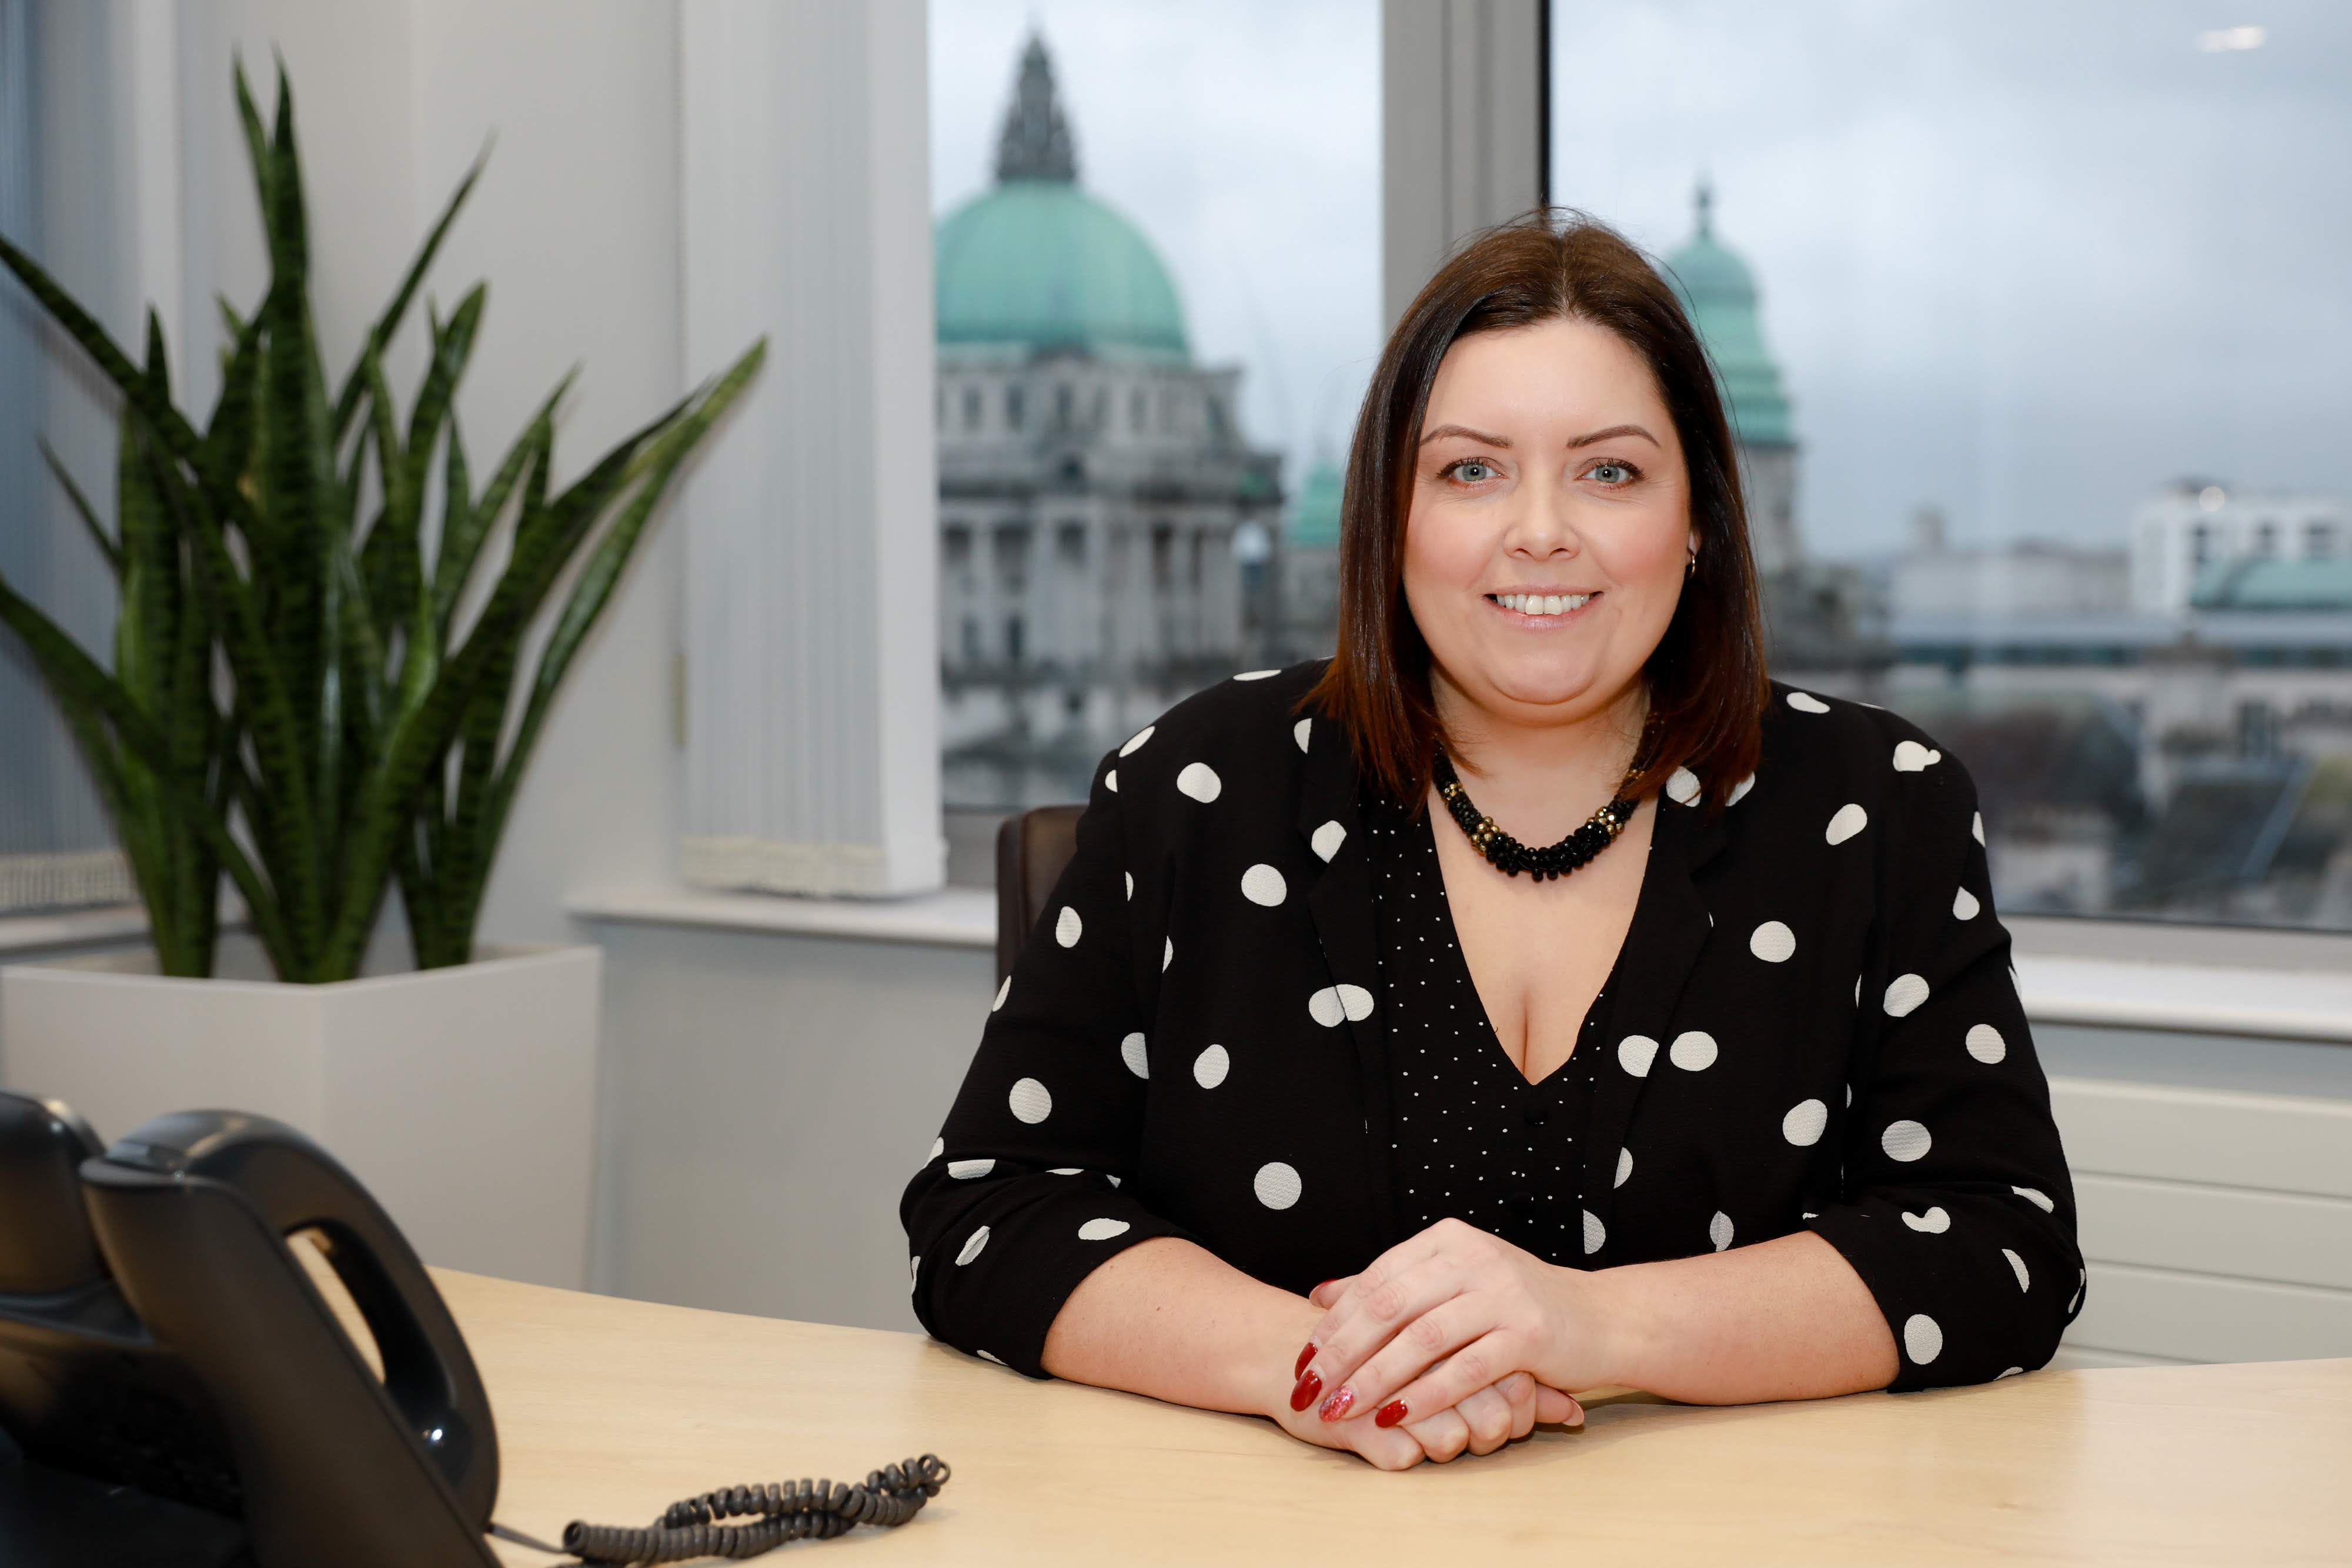 FINANCIAL BOOST: Deirdre Hargey MLA has welcomed the news that homeless people and asylum seekers can apply for the £100 cards